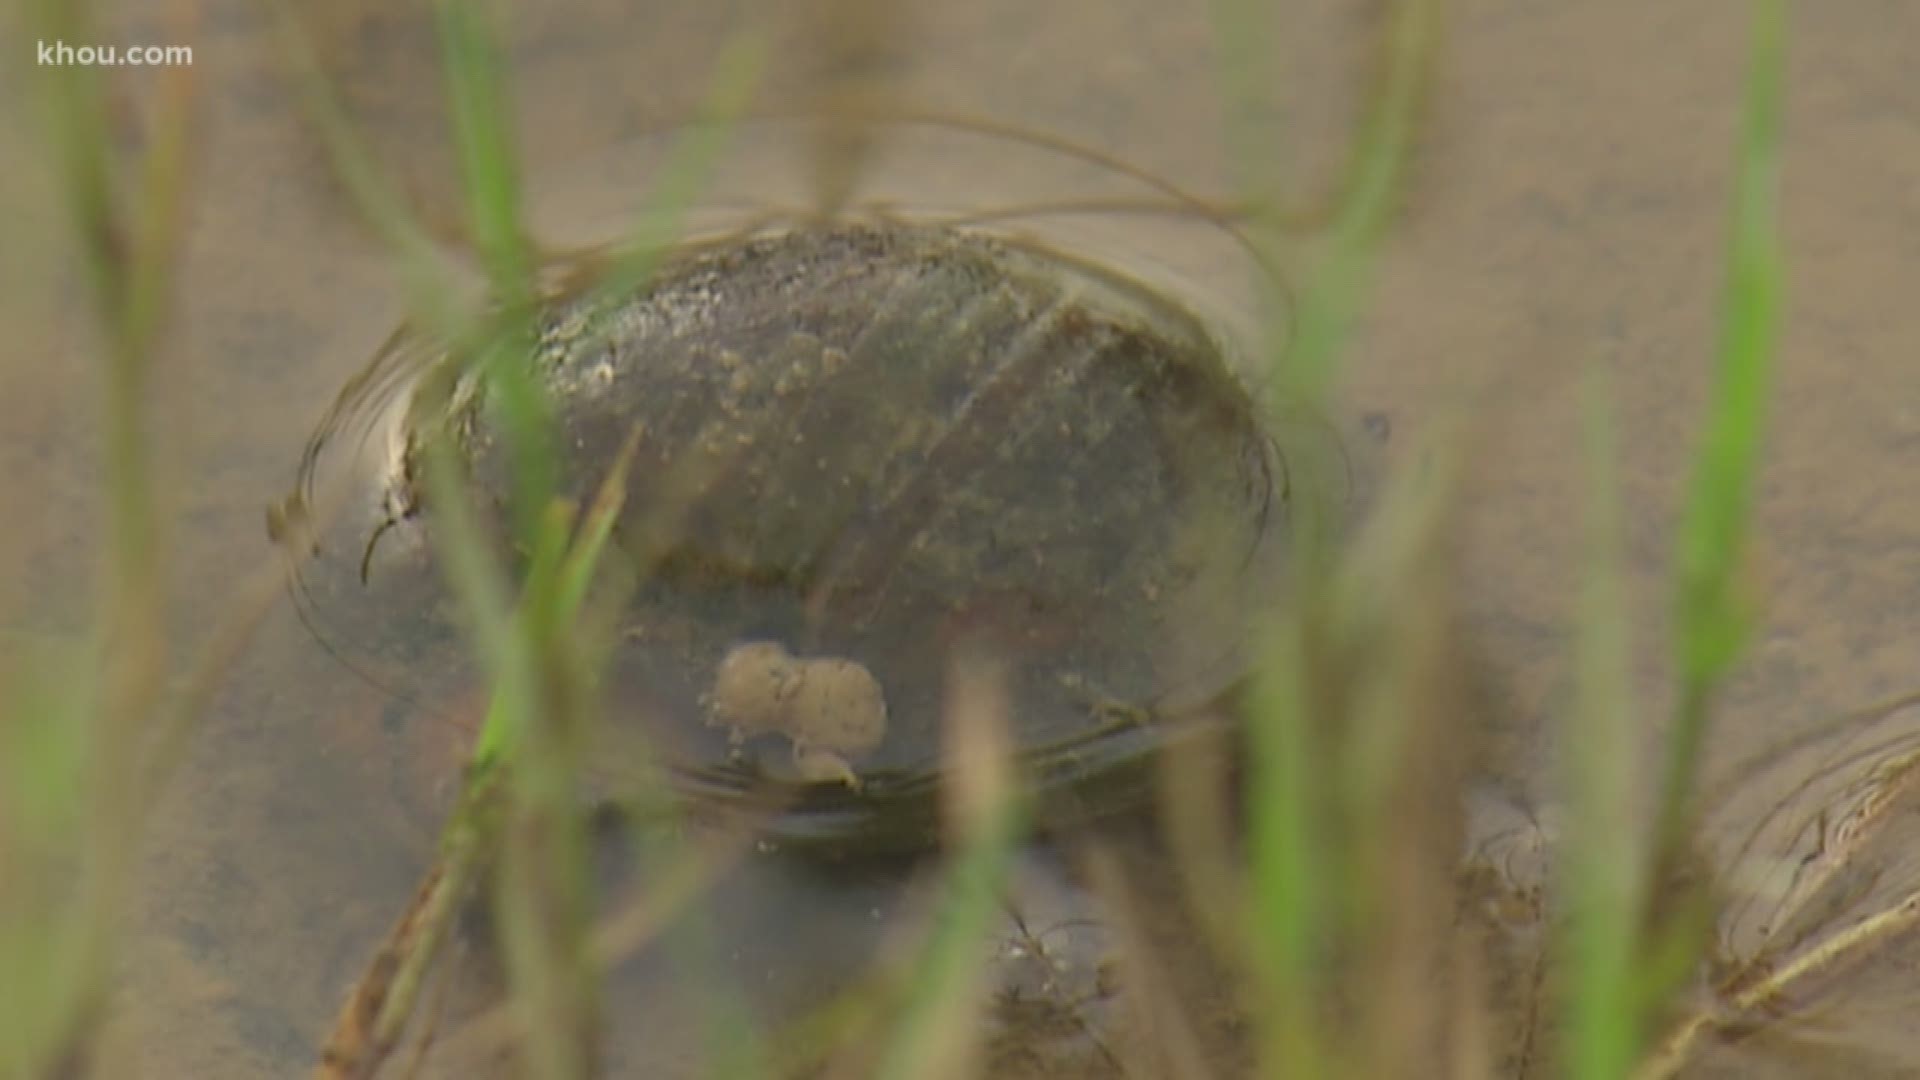 An invasive and aggressive species of snail has popped up in the Tamarron community in Katy.